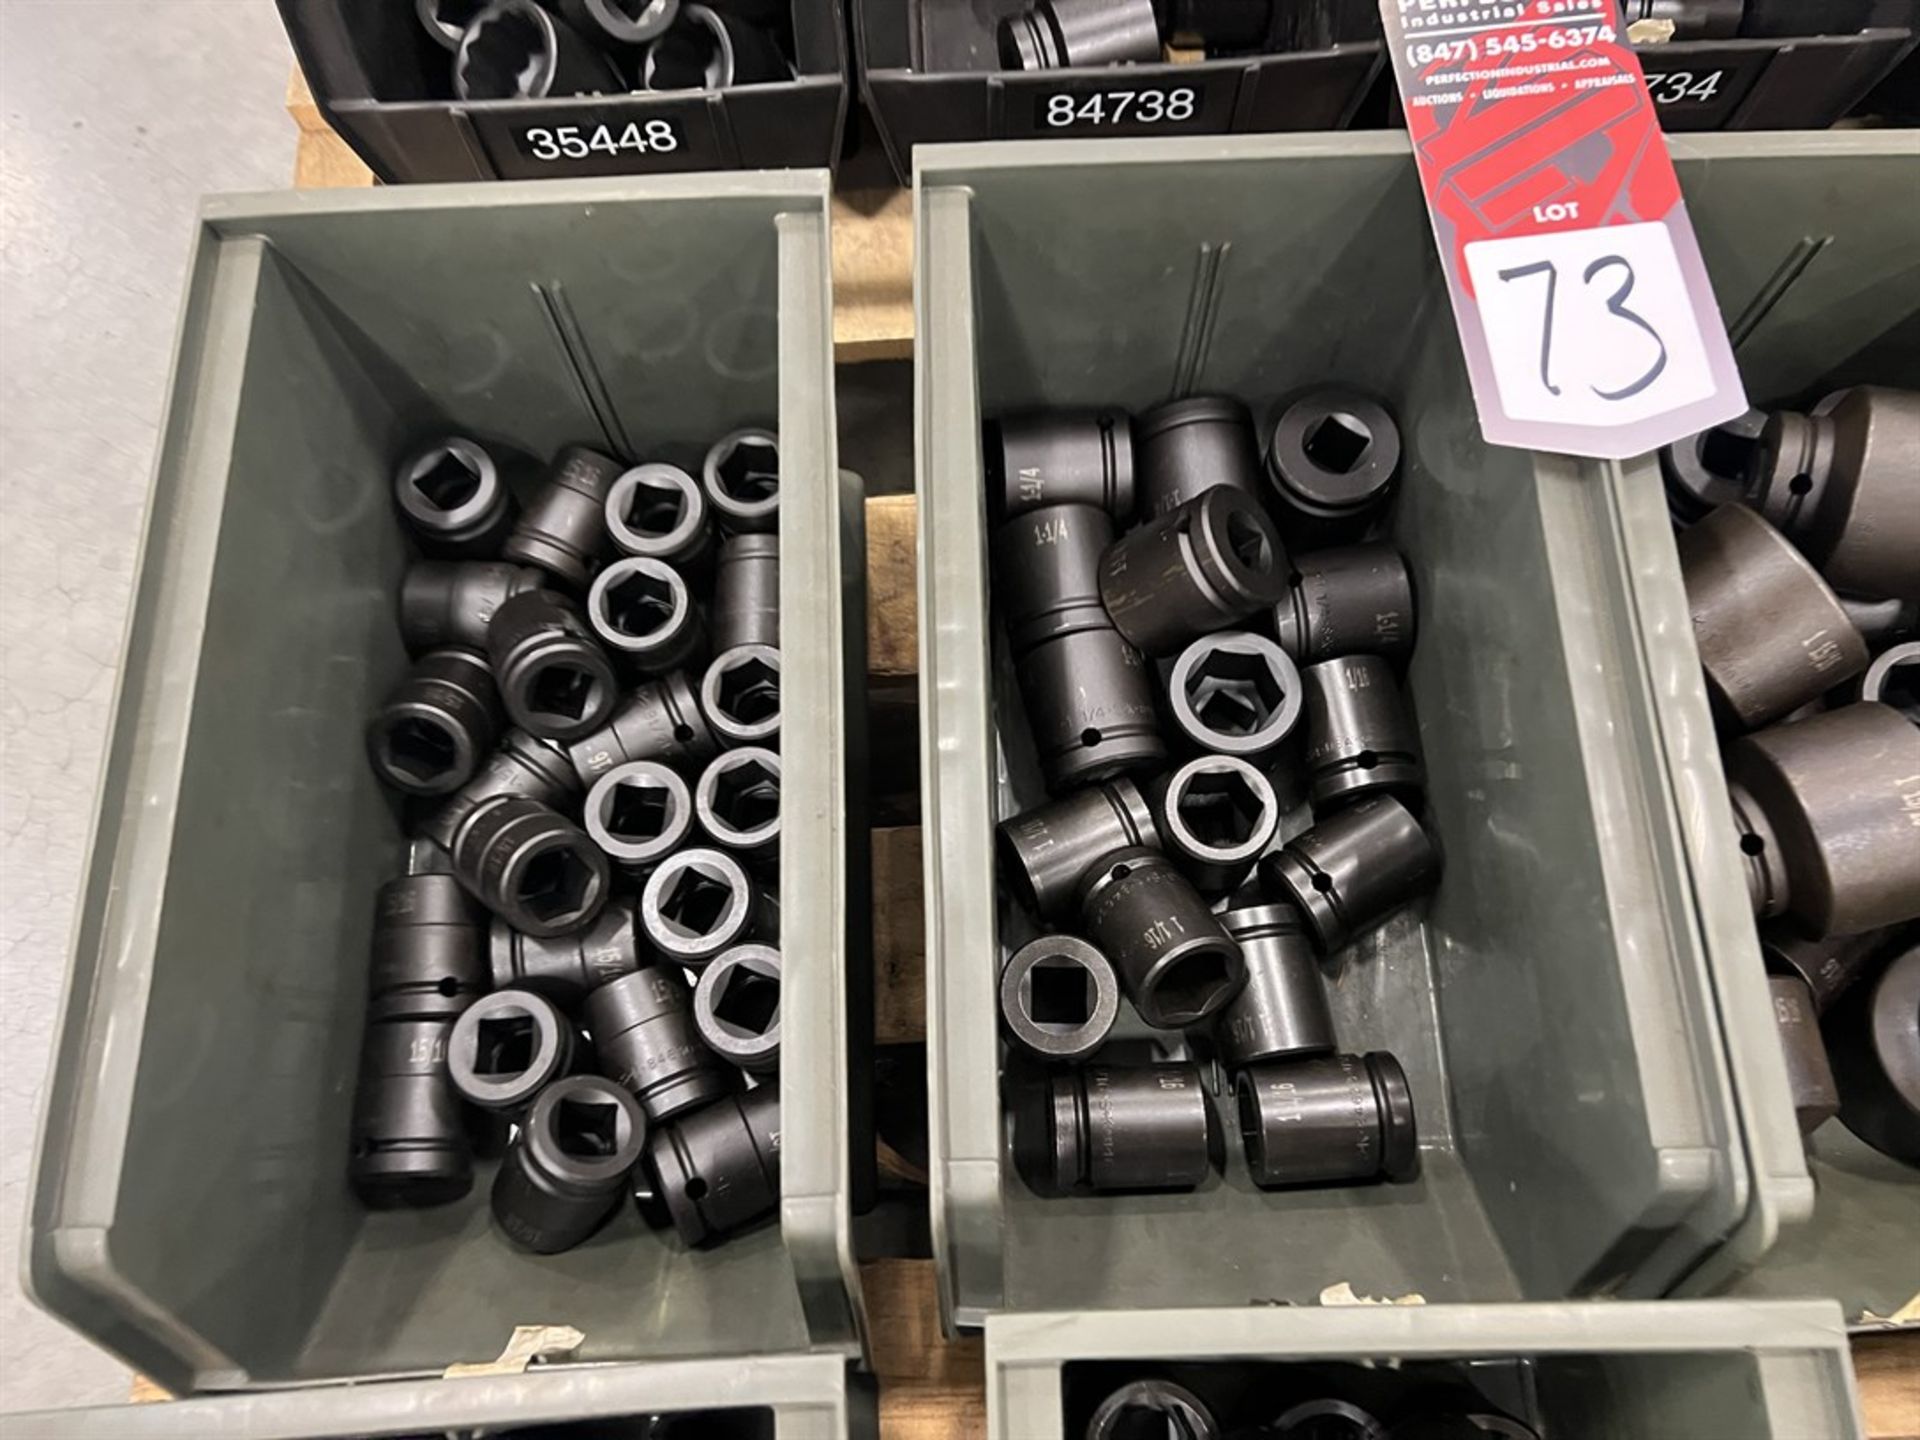 Pallet of 3/4" Drive Impact Sockets up to 38mm and 1-15/16" - Image 6 of 8